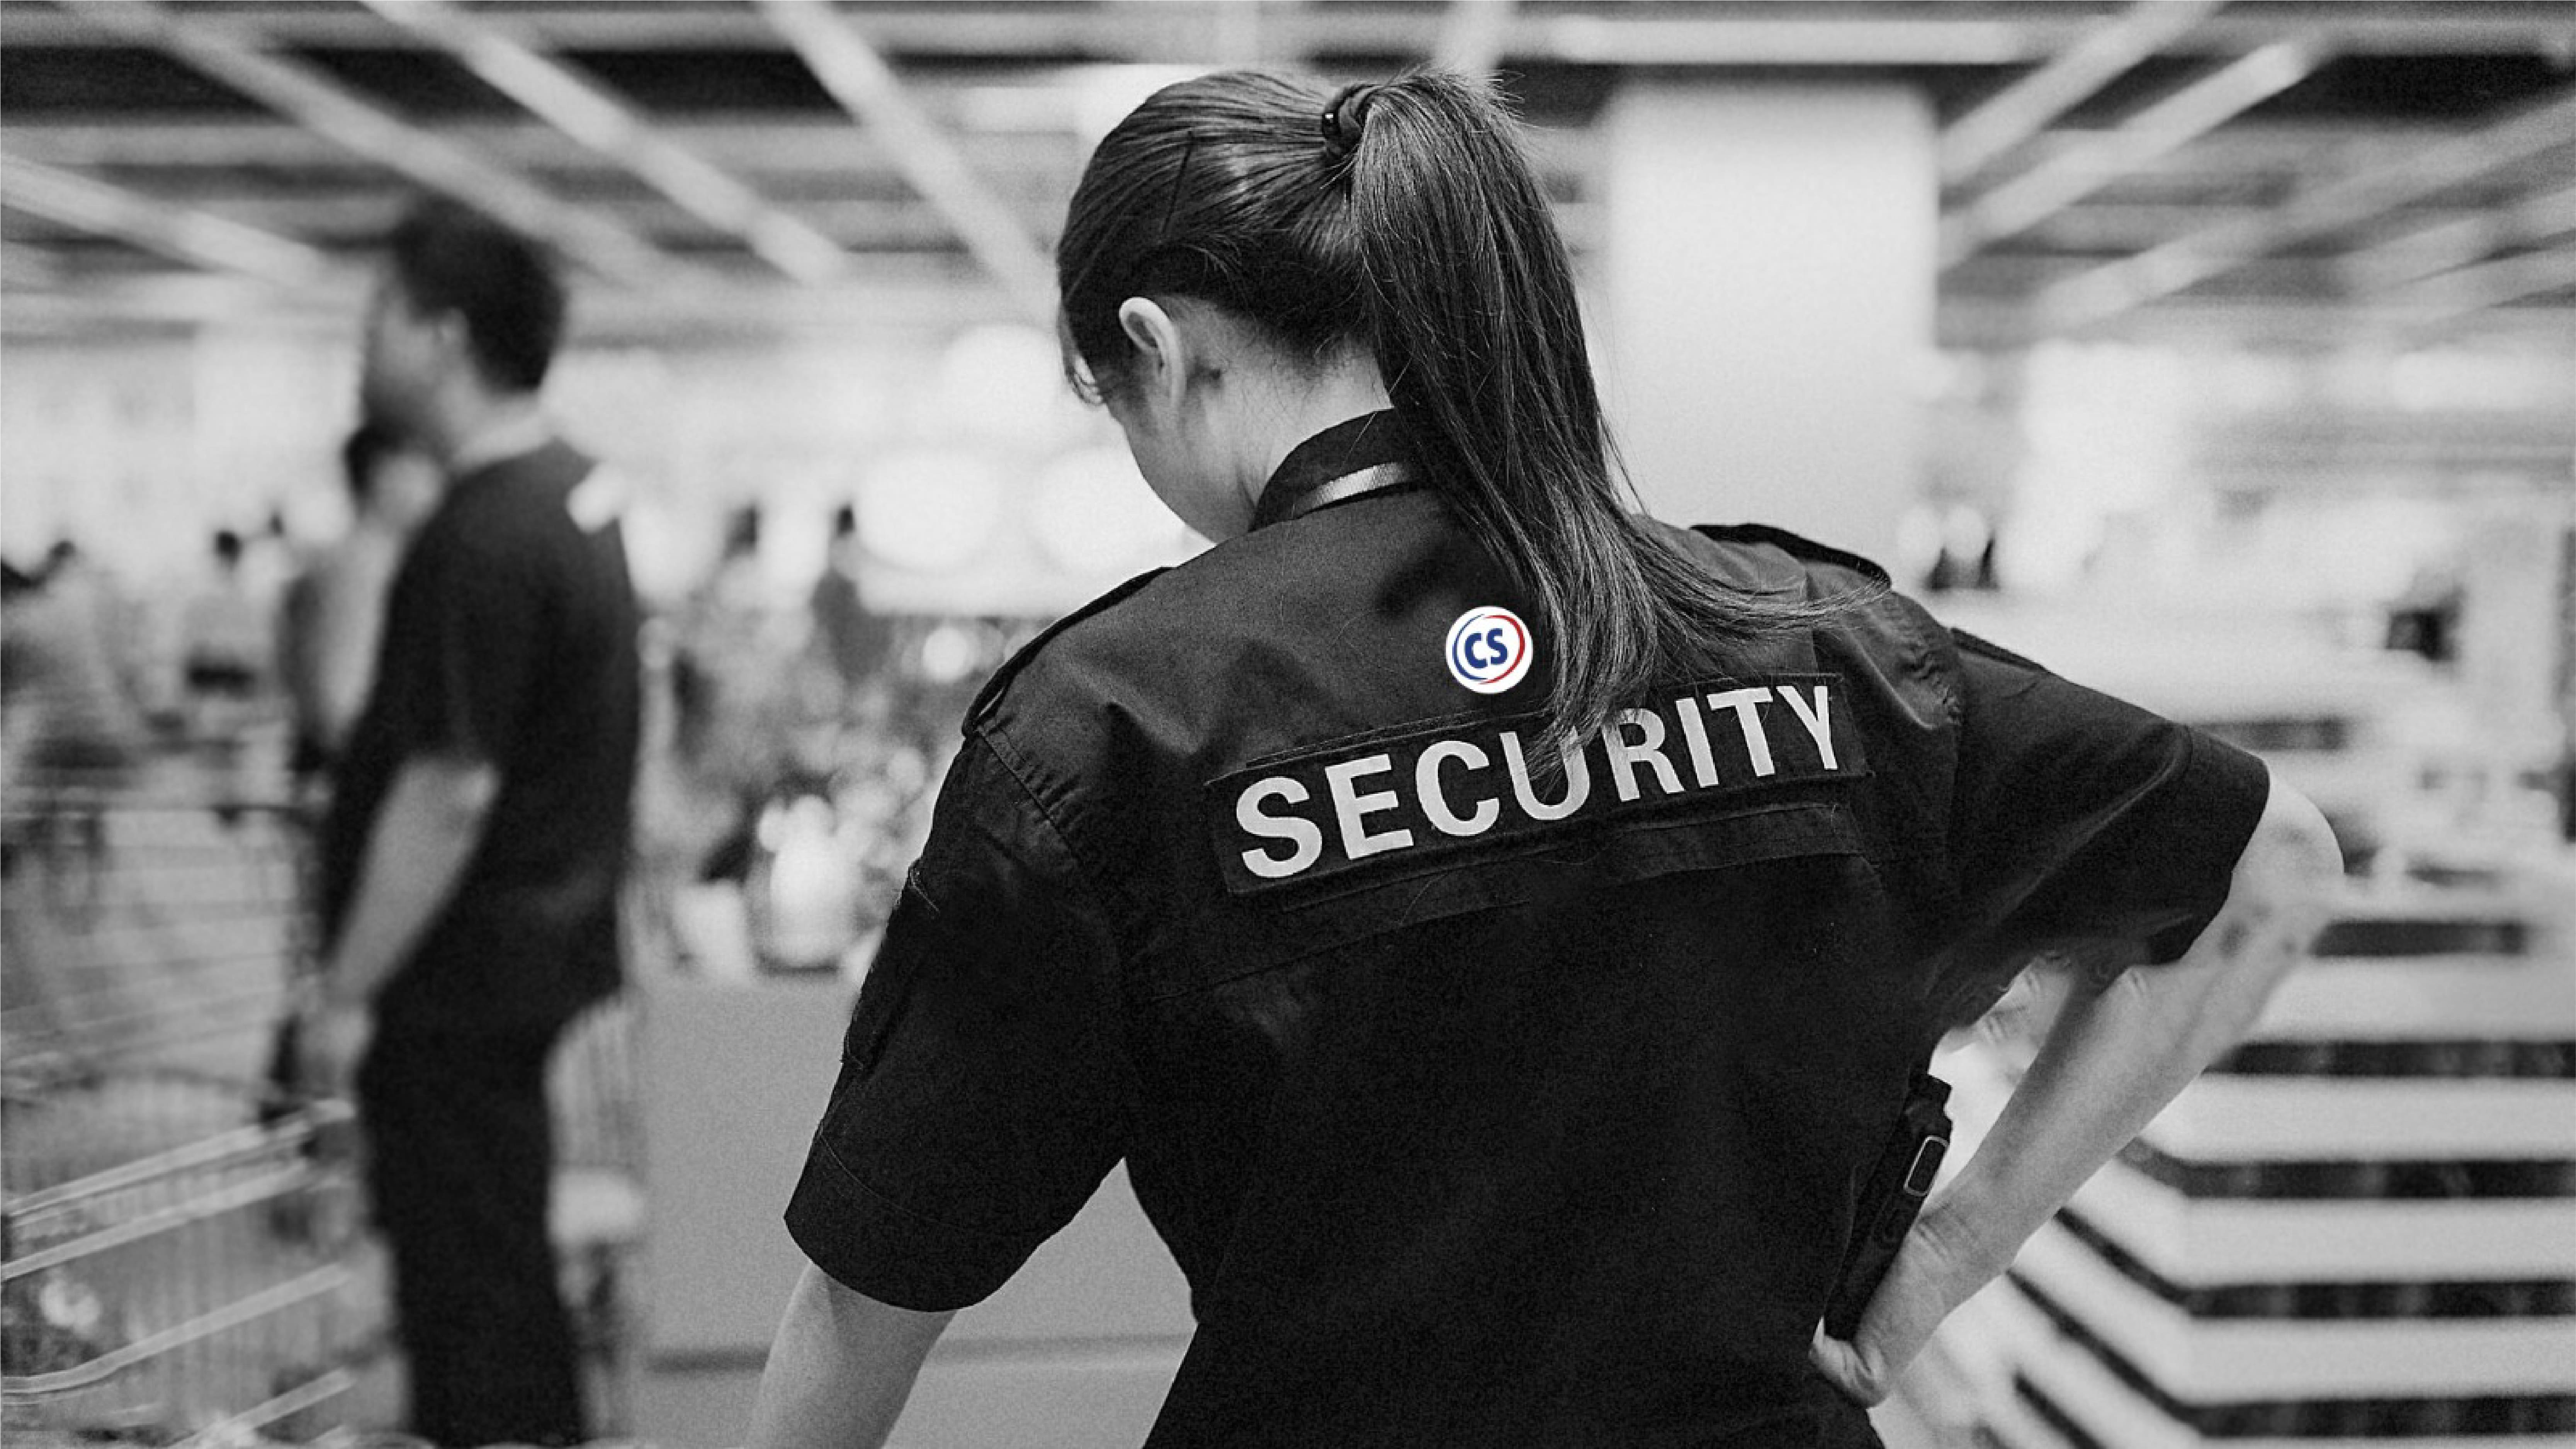 Event Security London